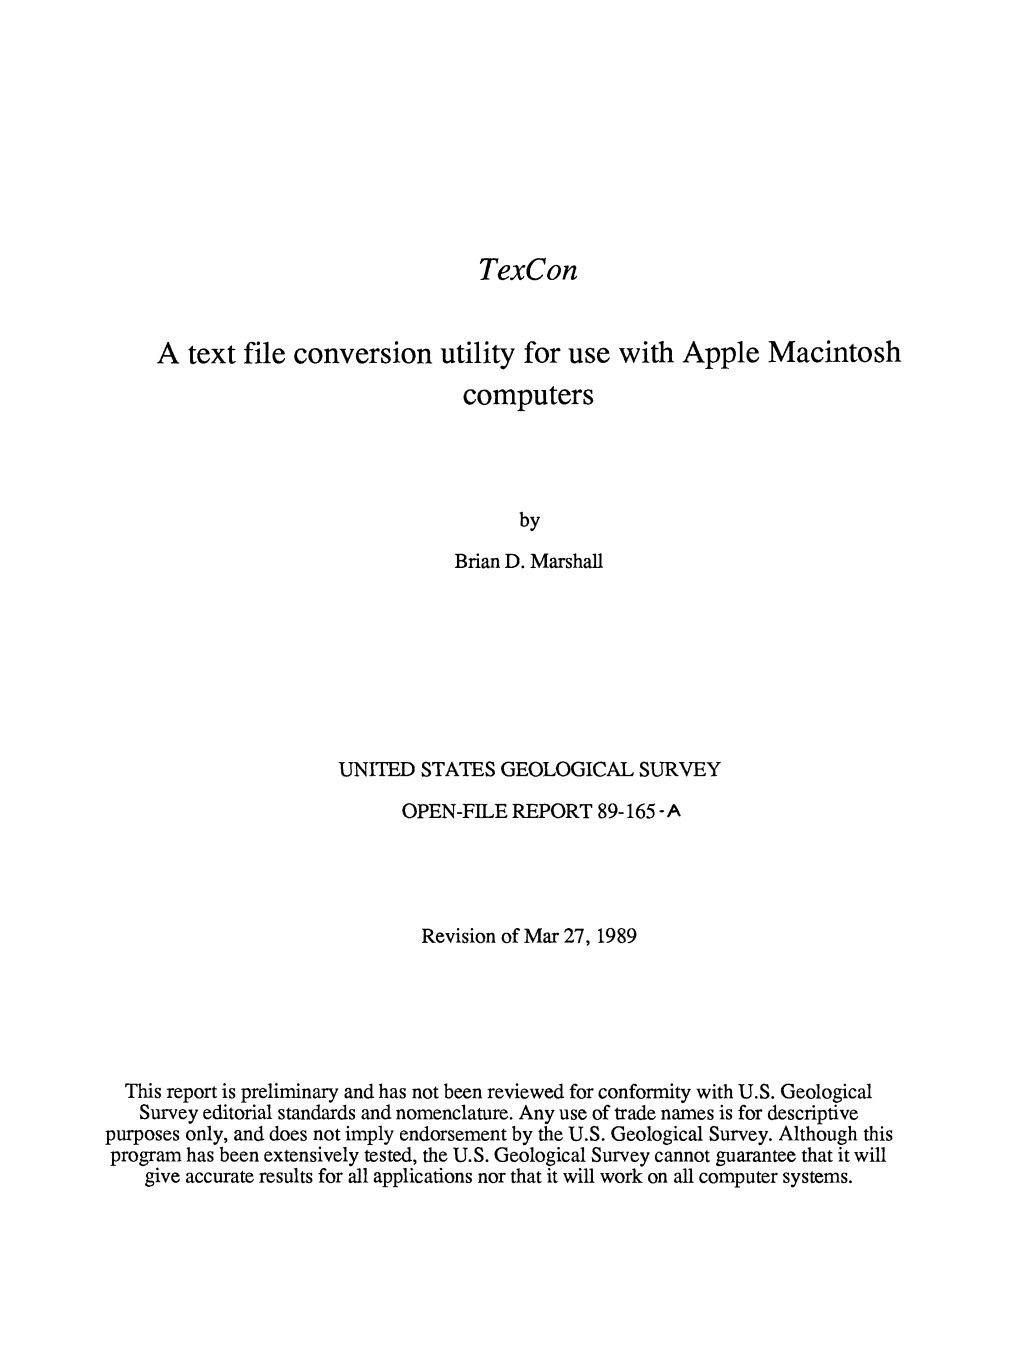 Texcon a Text File Conversion Utility for Use with Apple Macintosh Computers